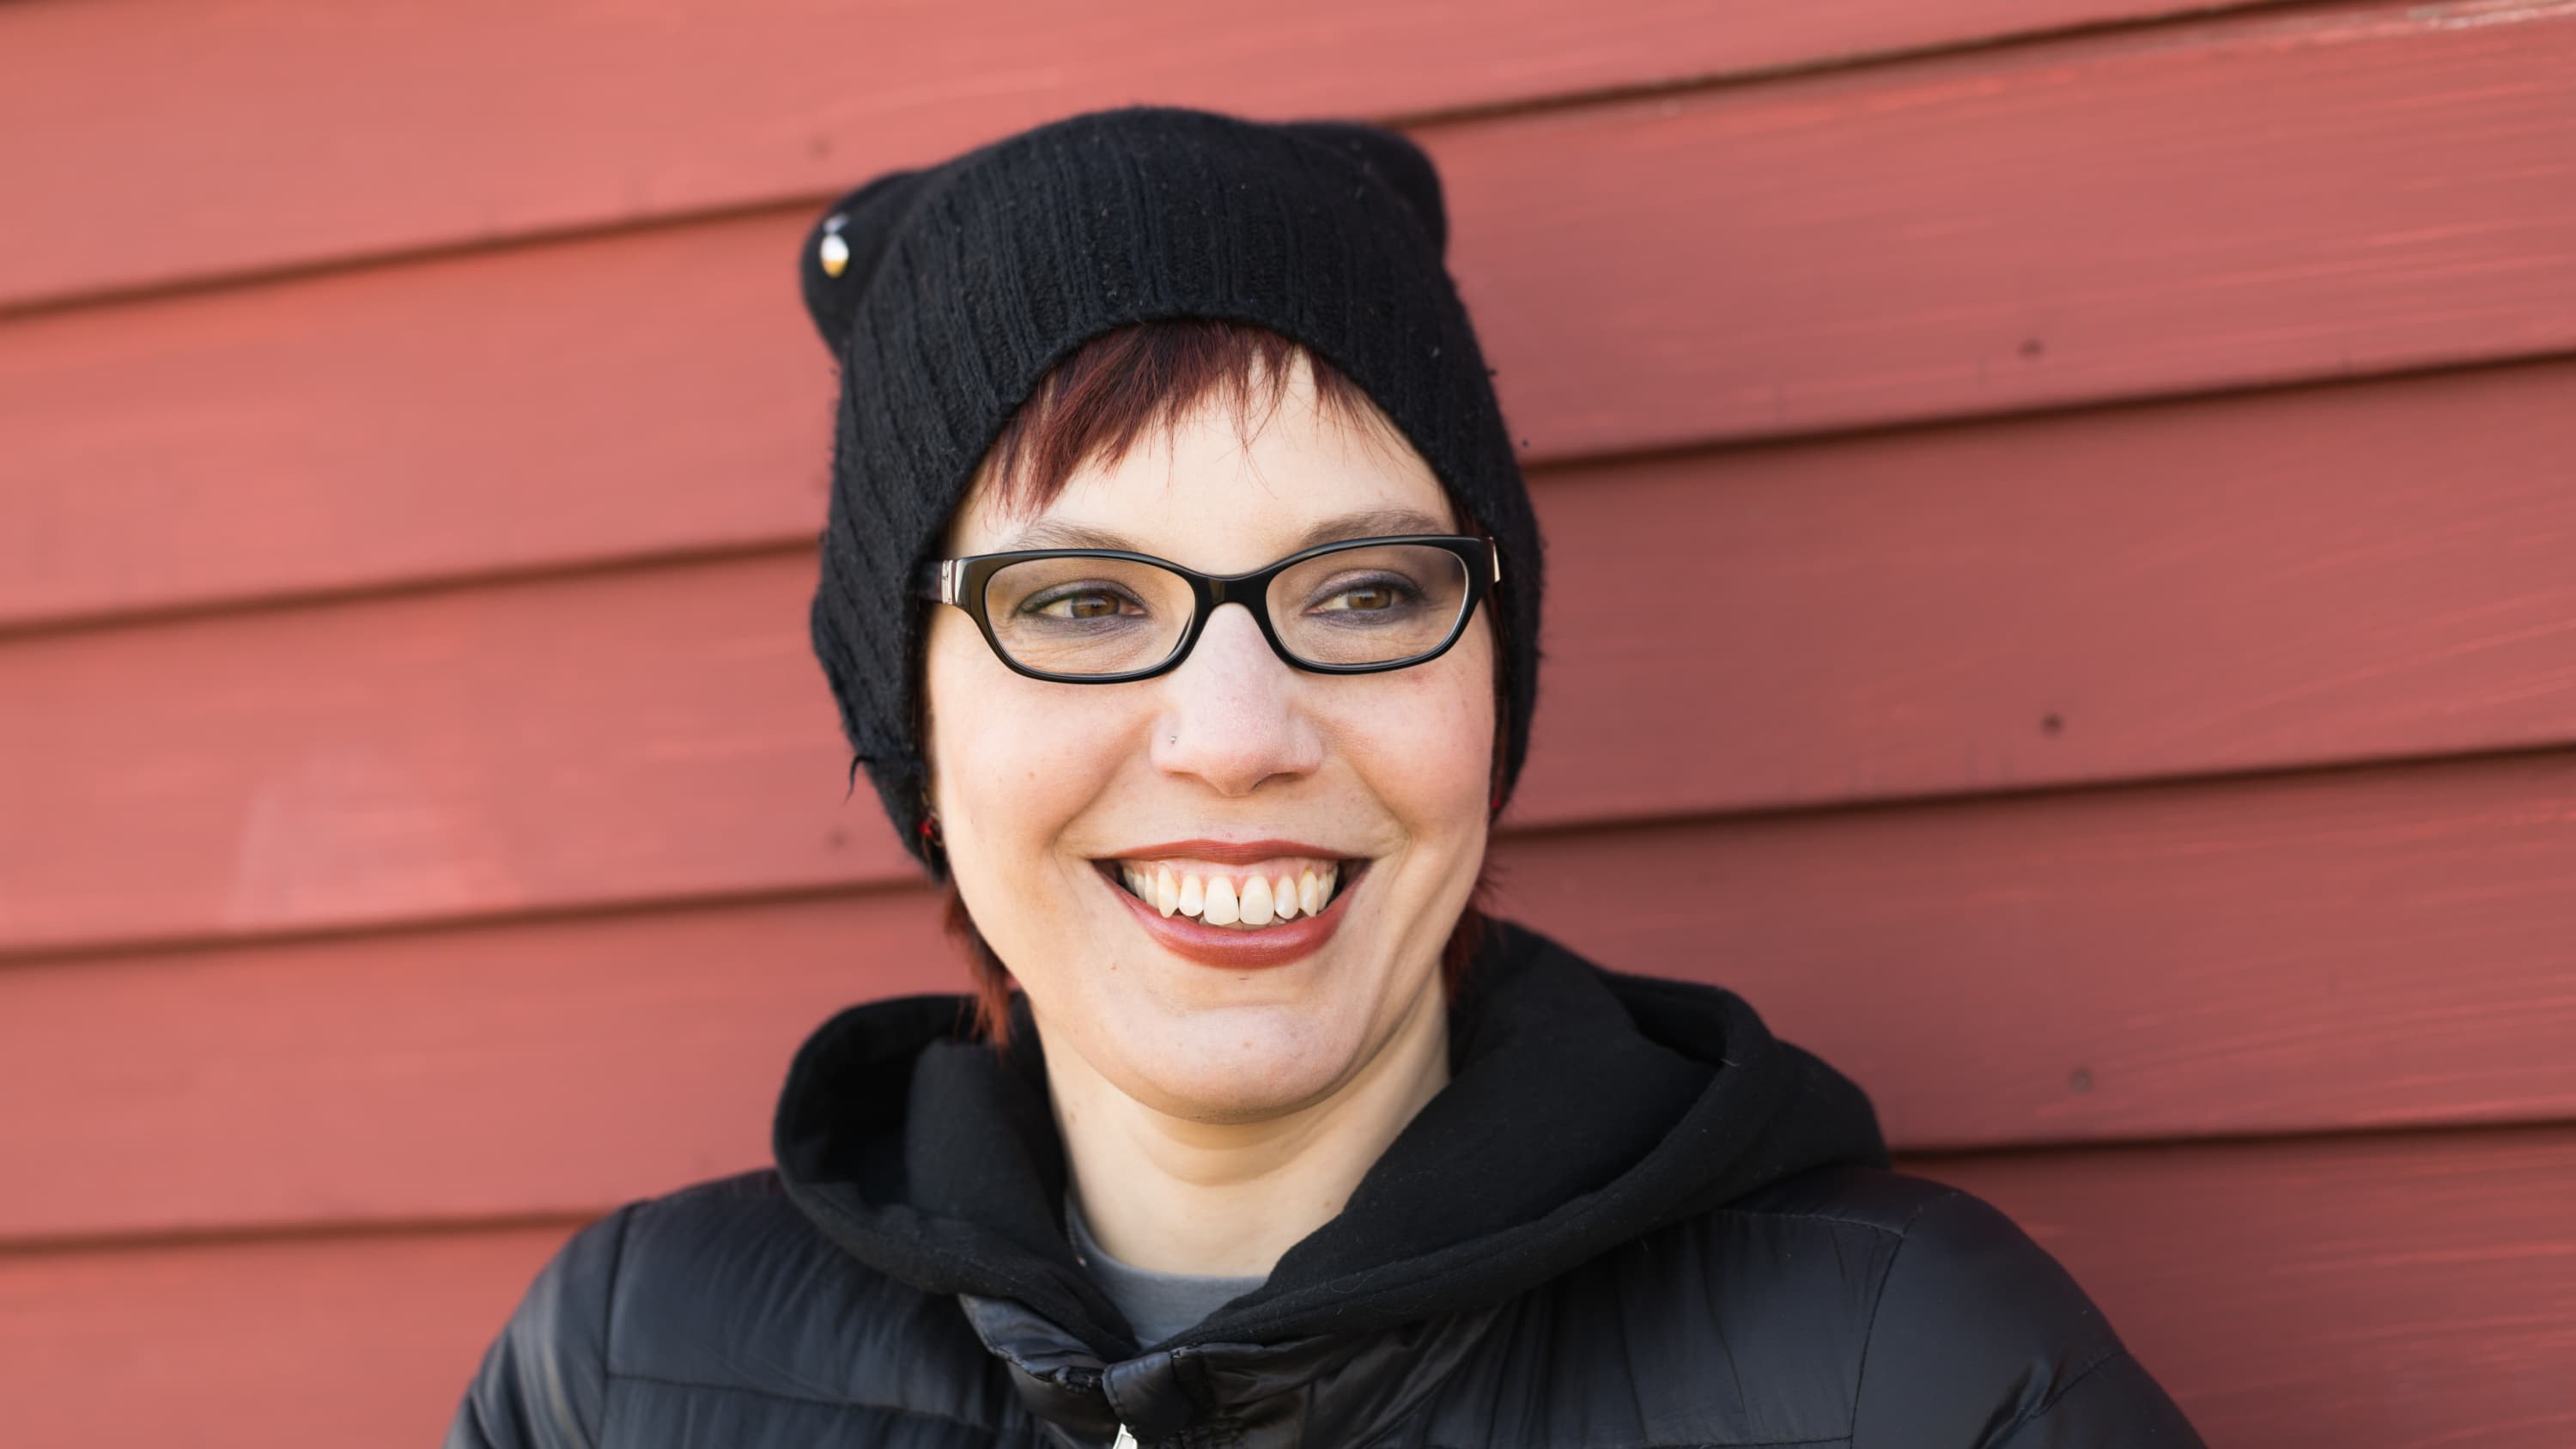 Erika Lewis, with glasses and knit hat, smiles into the camera.